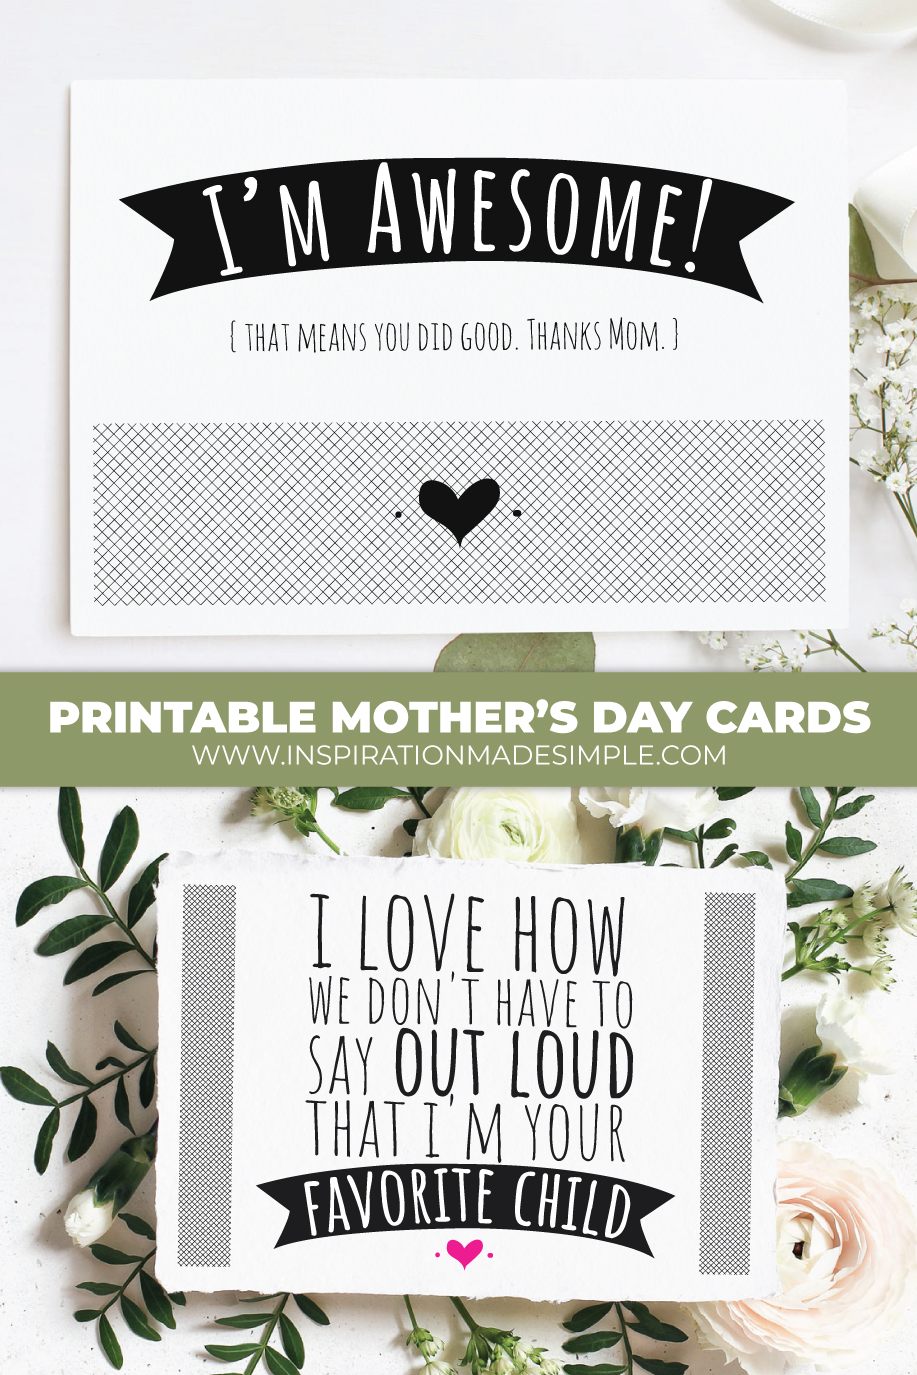 Mom's will love these printable Mother's Day Cards that appreciate the humour of motherhood